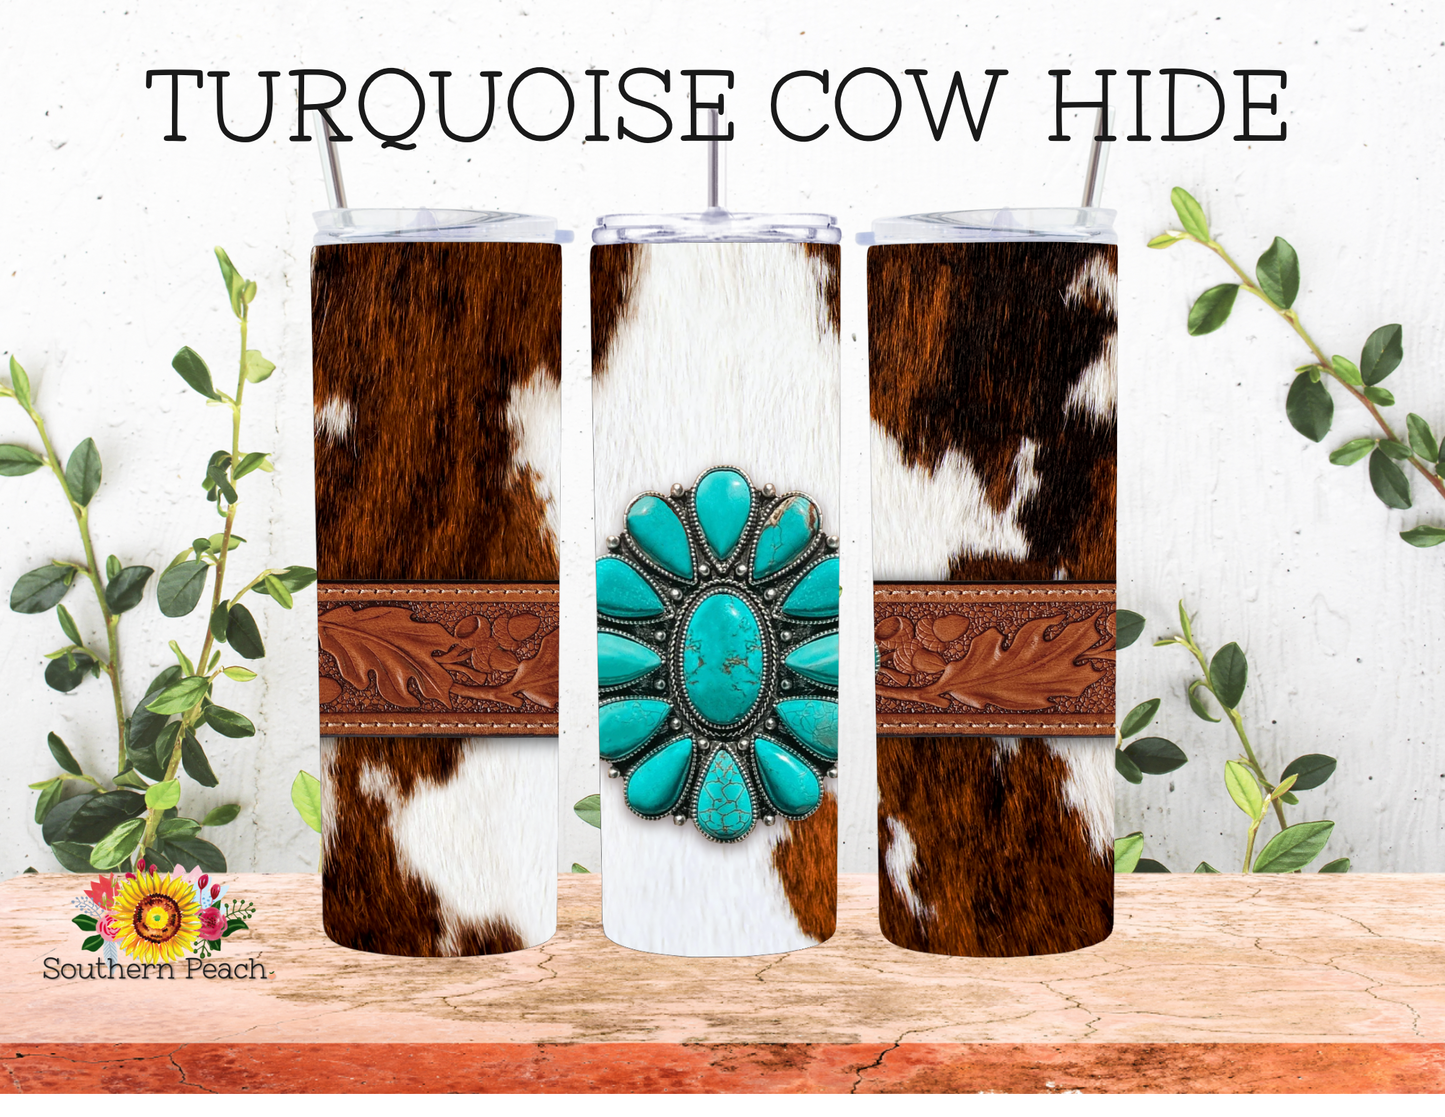 Turquoise Cow Hide